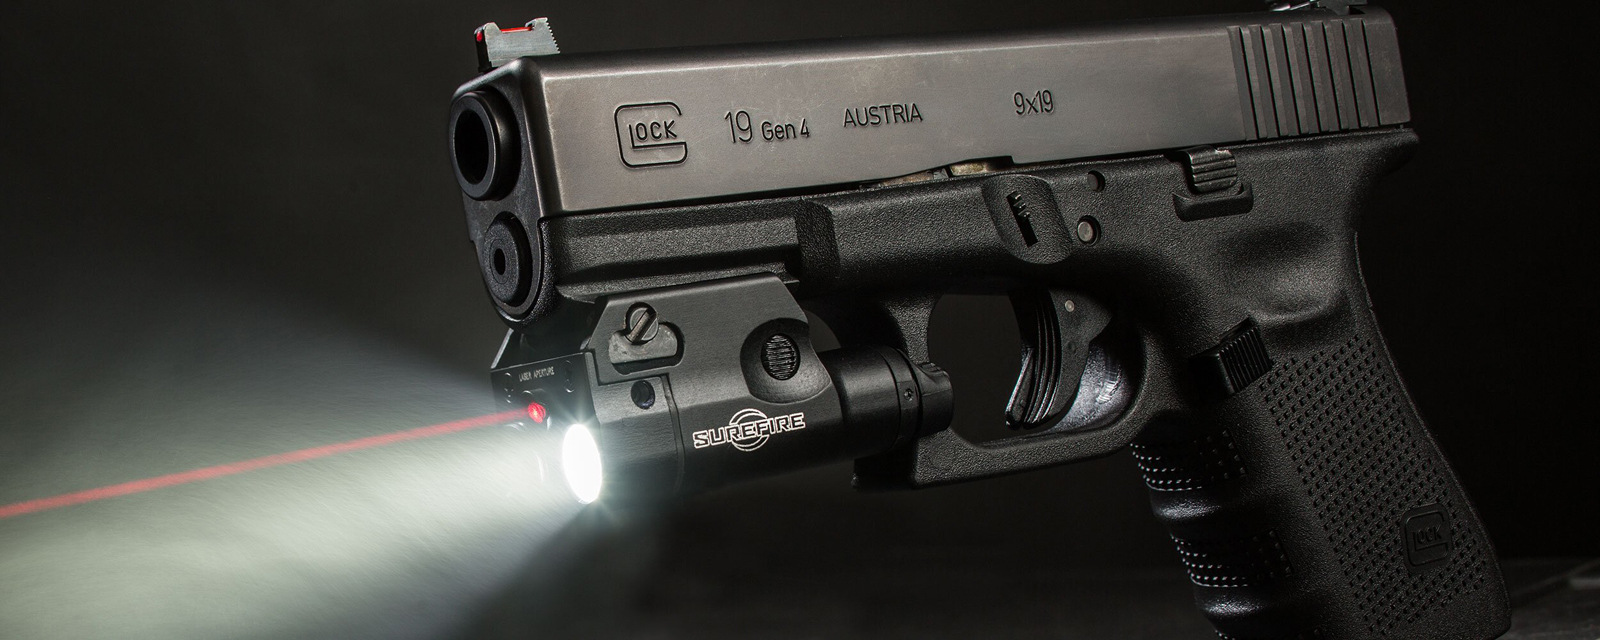 SUREFIRE-XC2-A-Ultra-Compact-LED-Handgun-Light-with-Red-Laser-Sight-_banner